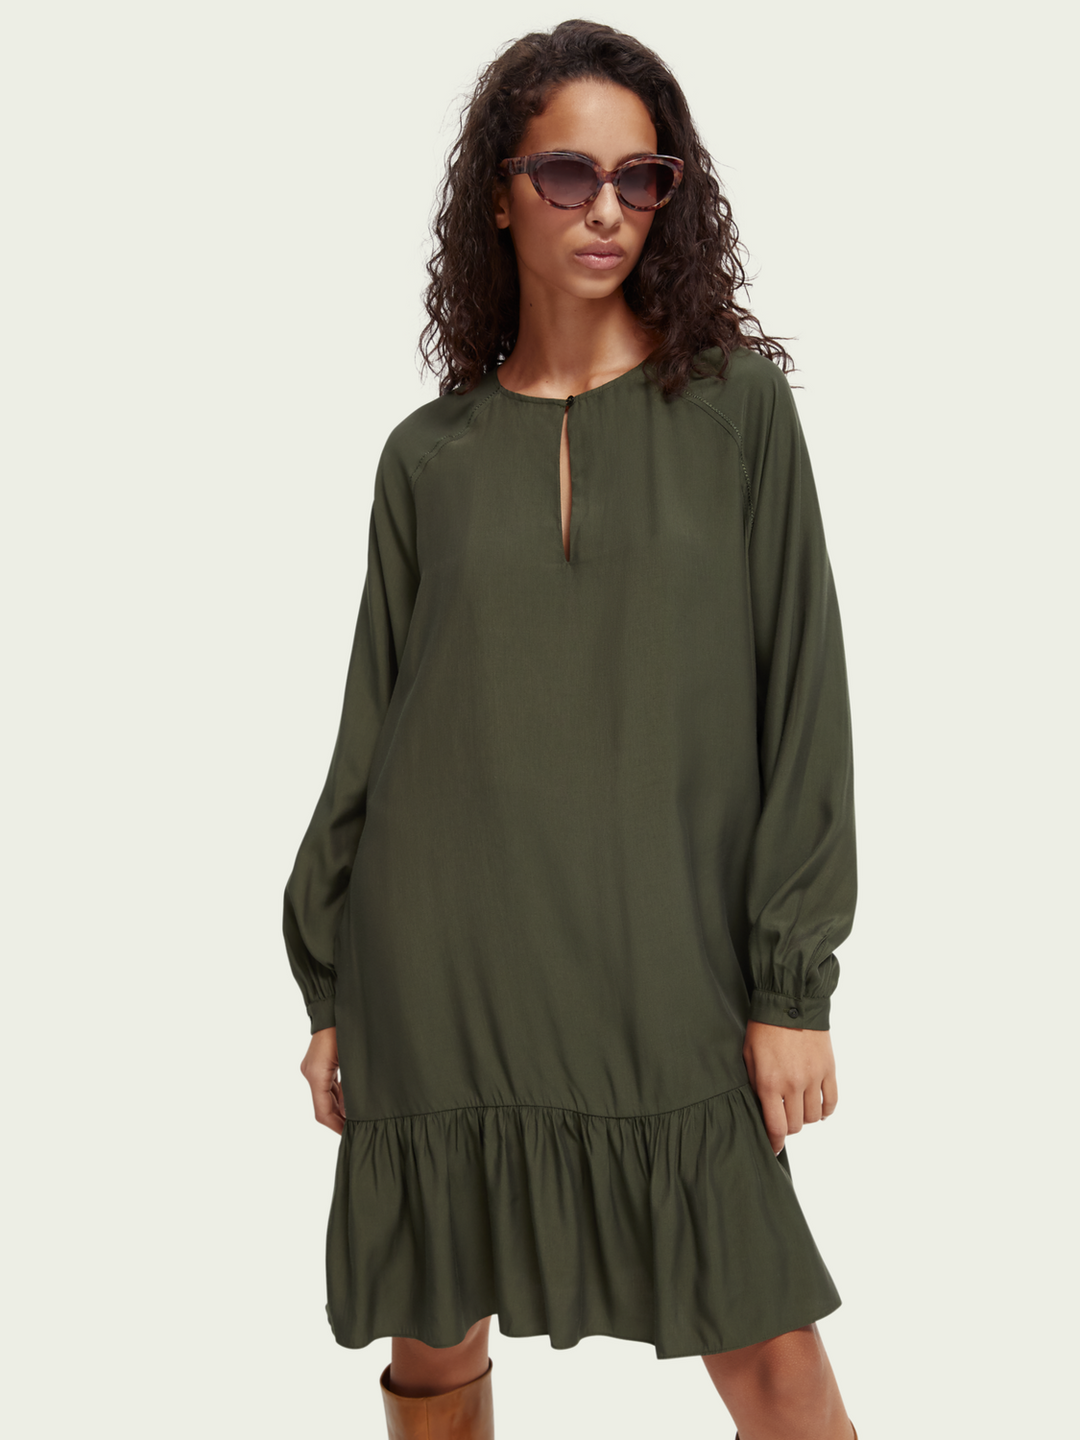 Easy-Fit Long-Sleeved Dress